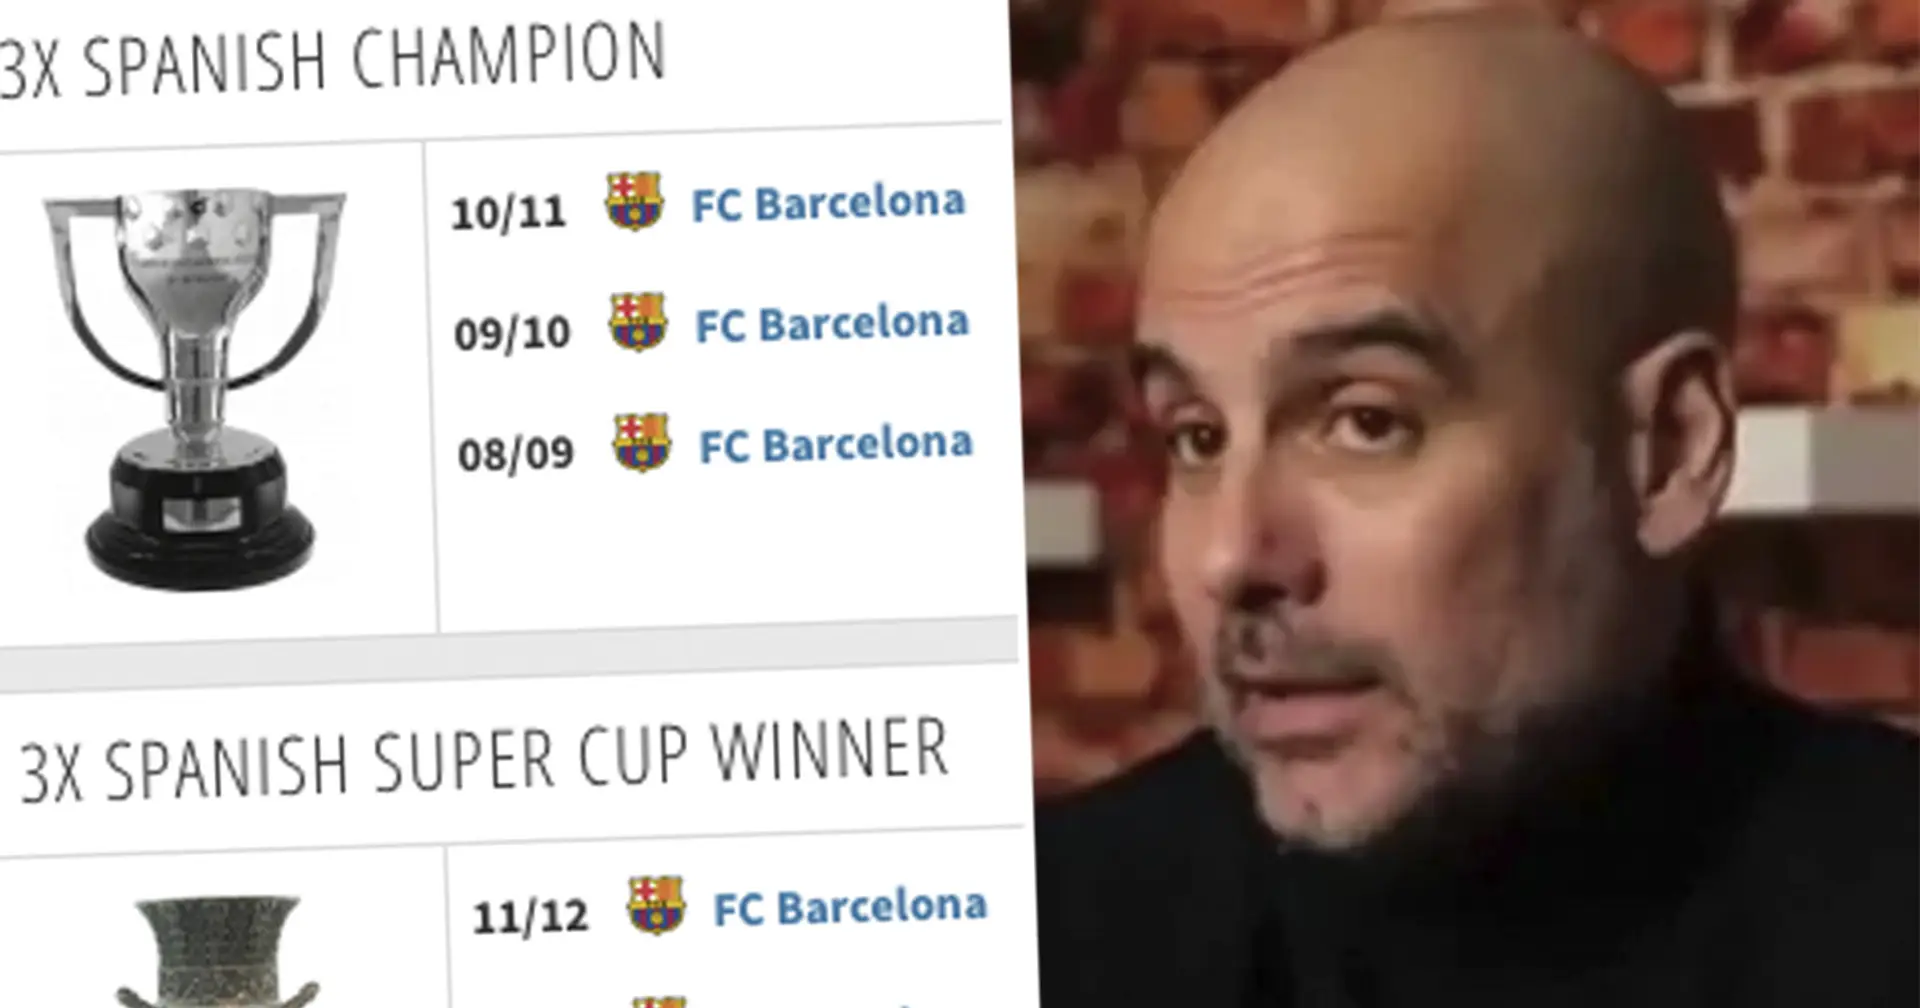 Guardiola names one active manager who could've won 'even more' trophies than him with prime Barca